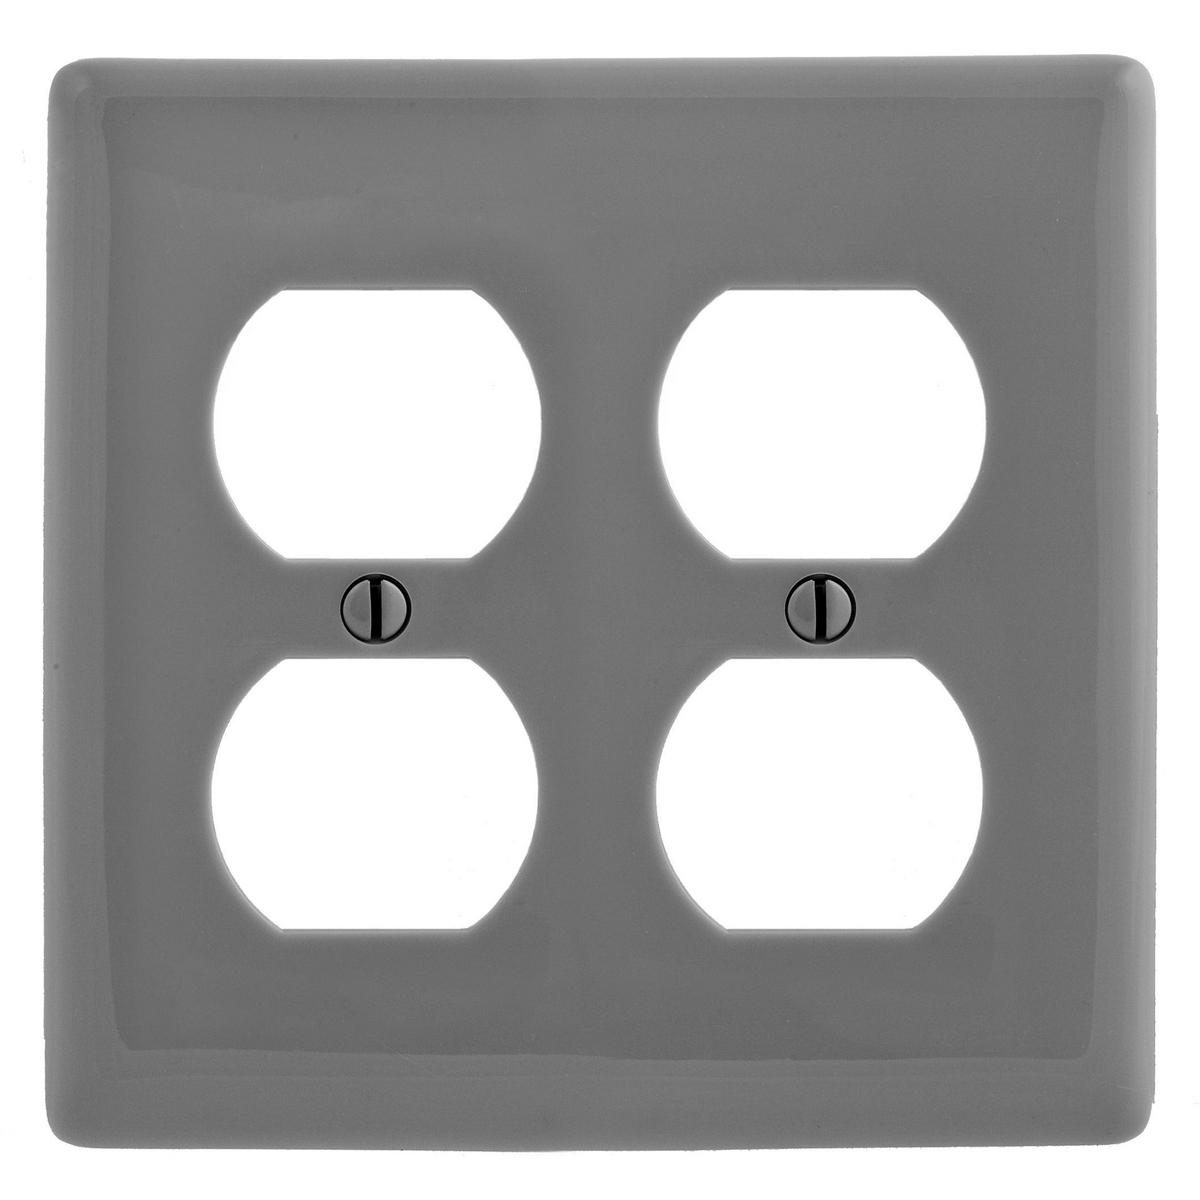 Hubbell NP82GY Wallplates and Box Covers, Wallplate, Nylon, 2-Gang, 2) Duplex, Gray  ; Reinforcement ribs for extra strength ; Captive screw feature holds mounting screw in place ; High-impact, self-extinguishing nylon material ; Standard Size is 1/8" larger to give you